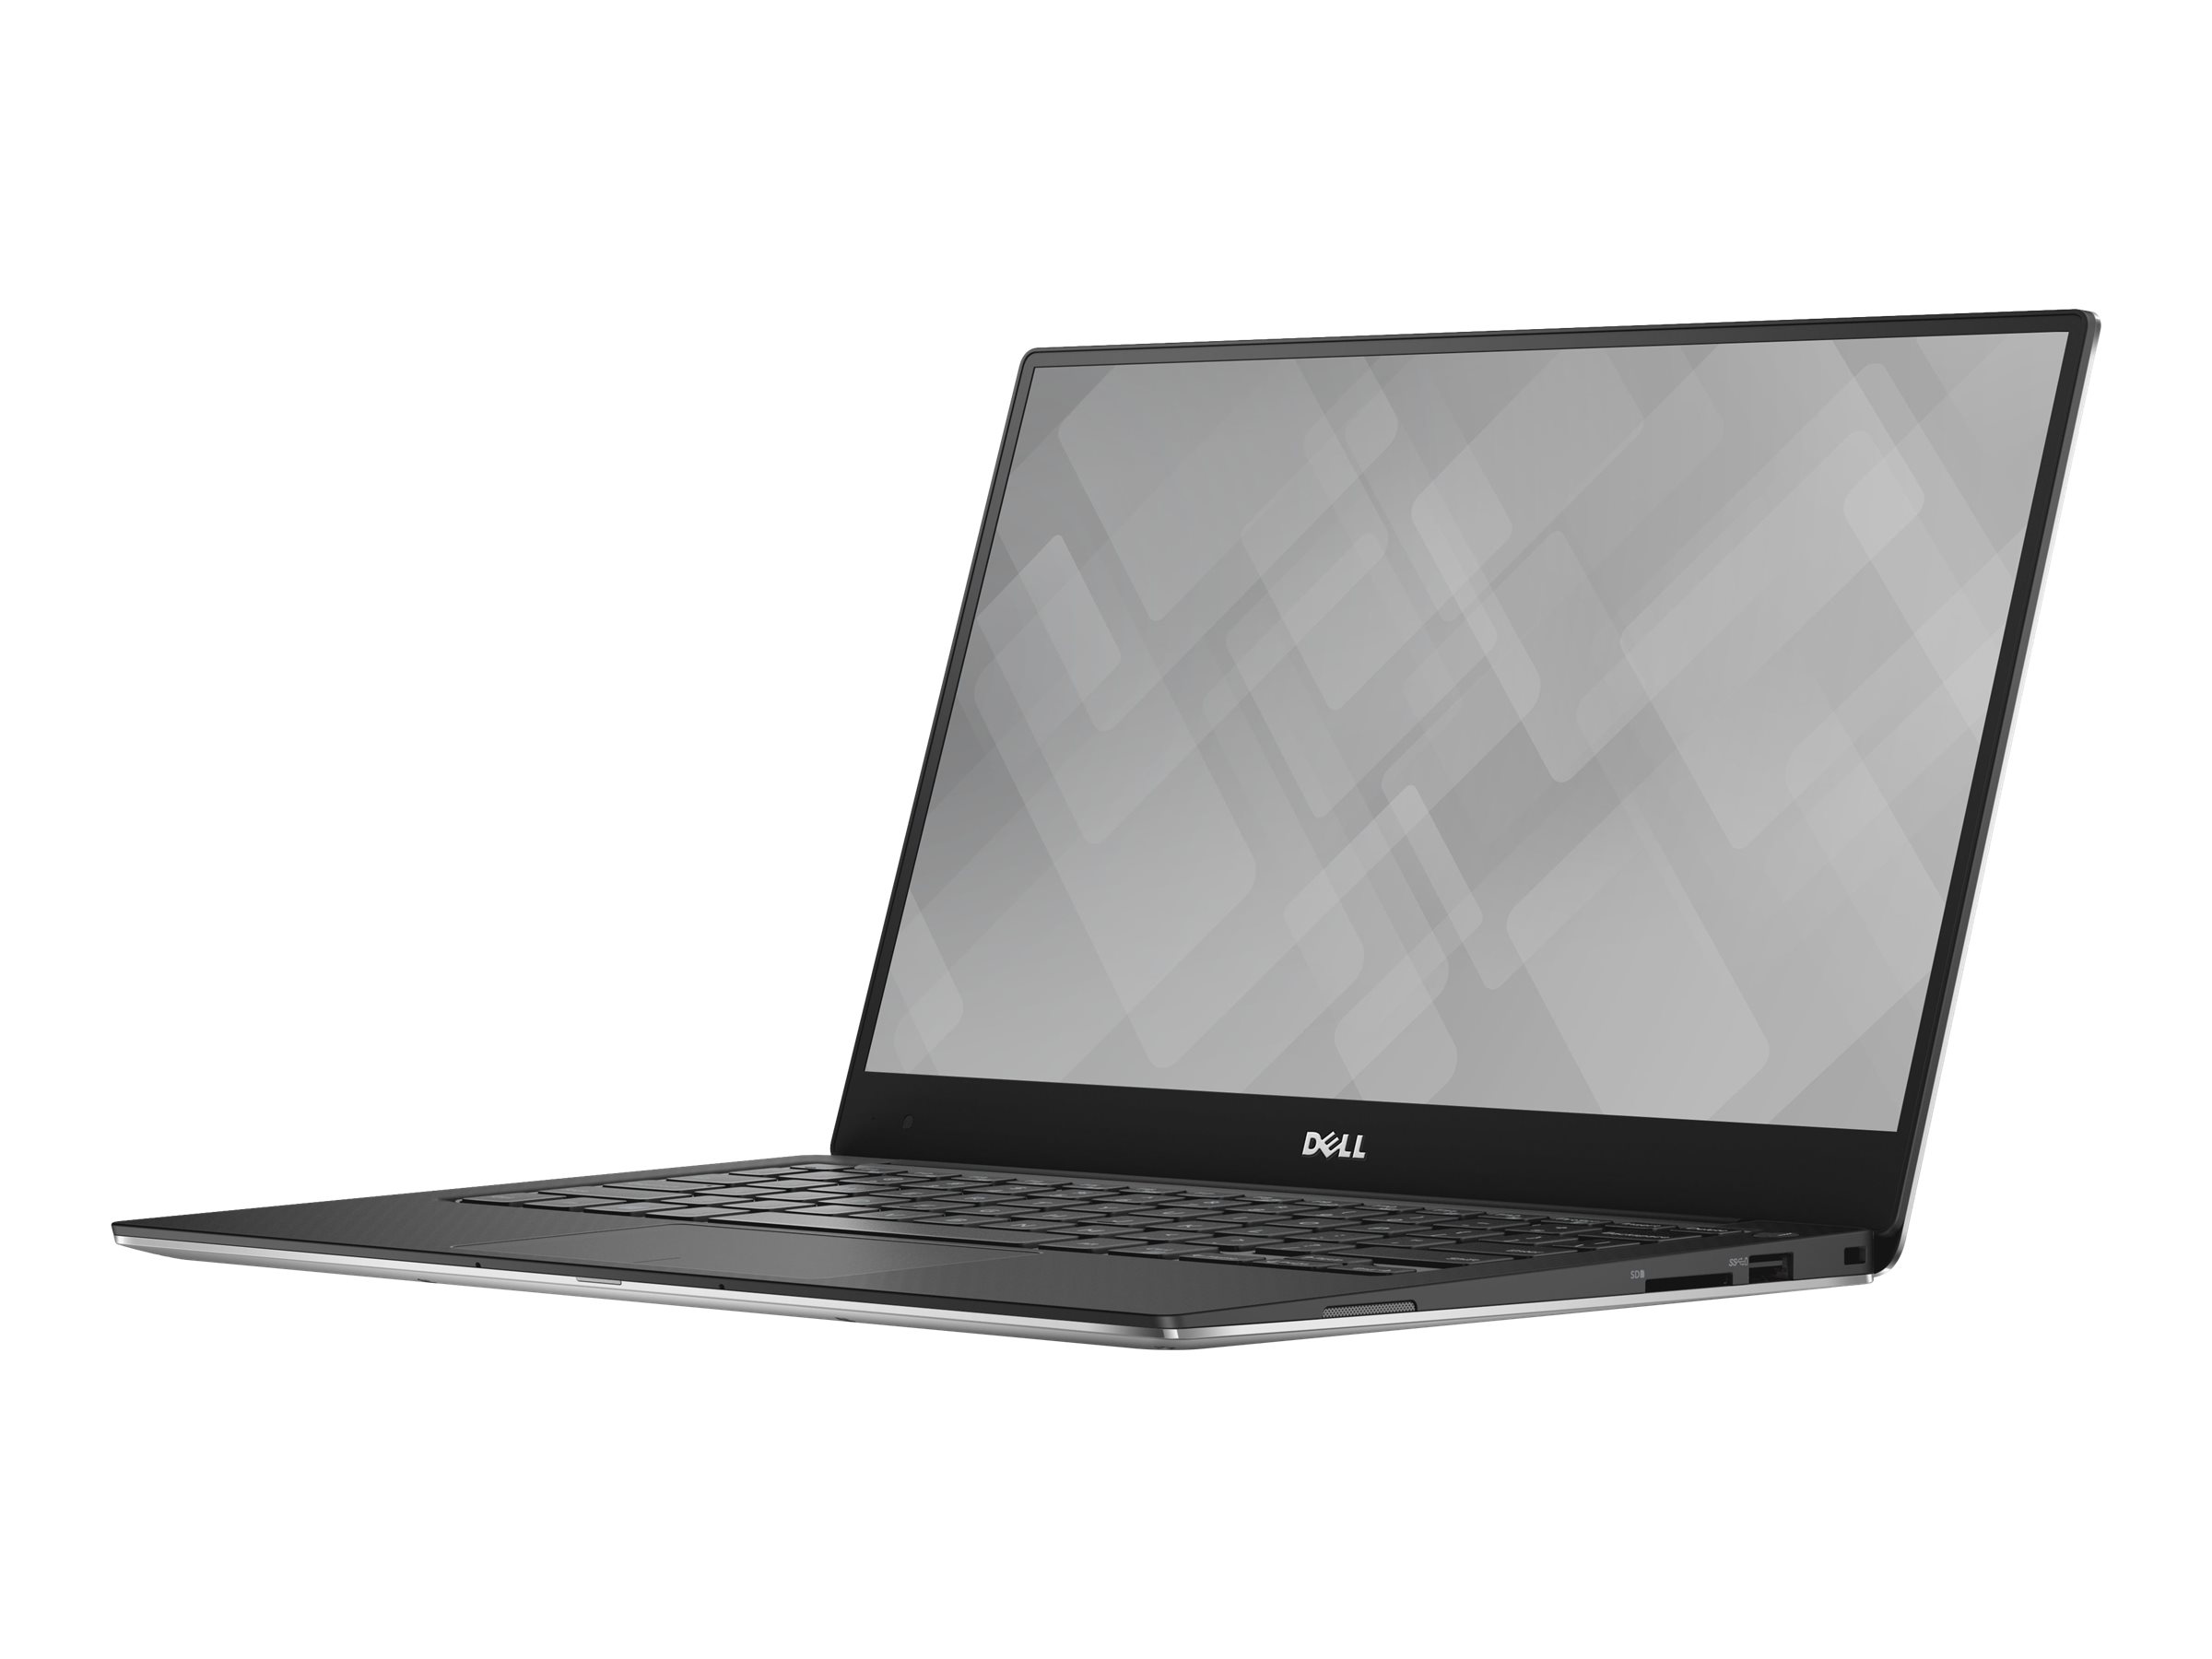 Dell XPS 13 9360 - Intel Core i5 - 7200U / up to 3.1 GHz - Win 10 Home 64-bit - HD Graphics 620 - 8 GB RAM - 256 GB SSD - 13.3" touchscreen 3200 x 1800 (QHD+) - Wi-Fi 5 - silver - kbd: English - with 1 Year Hardware Service with Onsite/In-Home Service After Remote Diagnosis - image 1 of 25